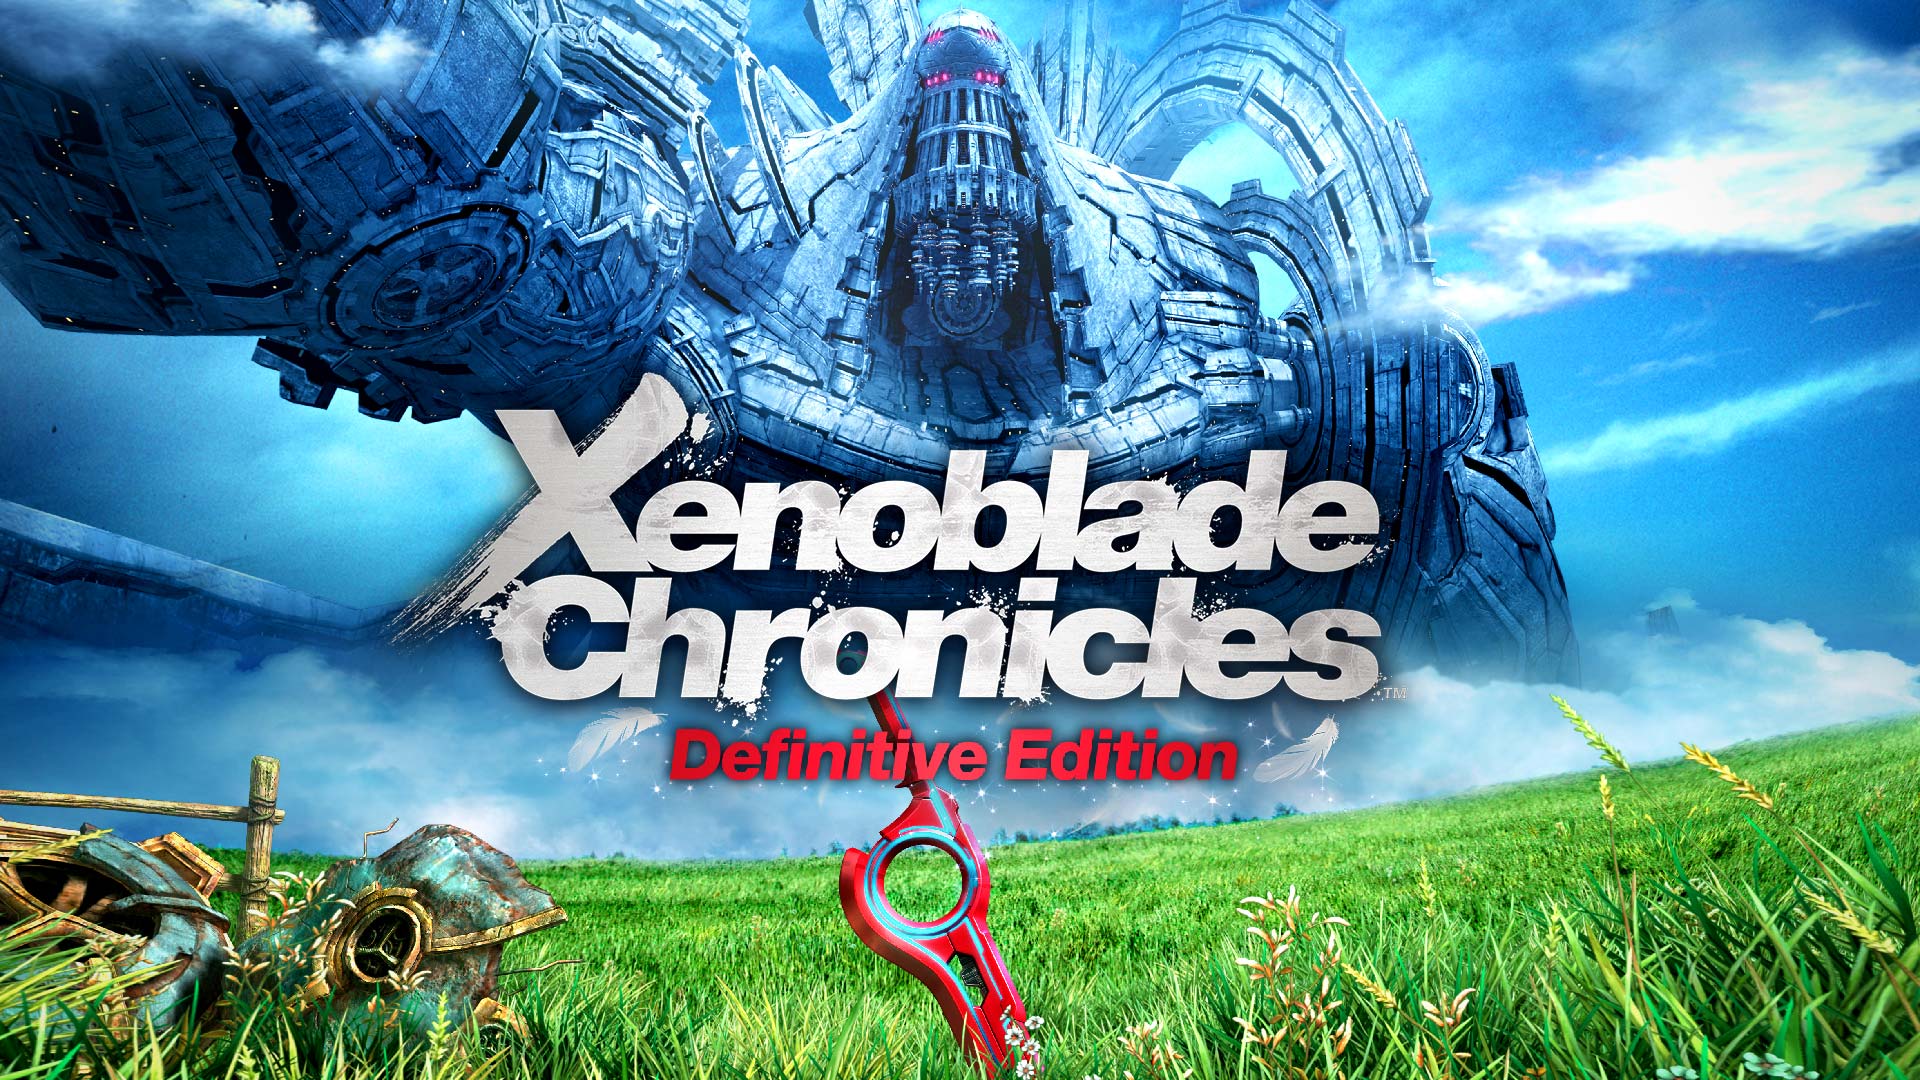 Xenoblade Chronicles: Definitive Edition for Nintendo Switch